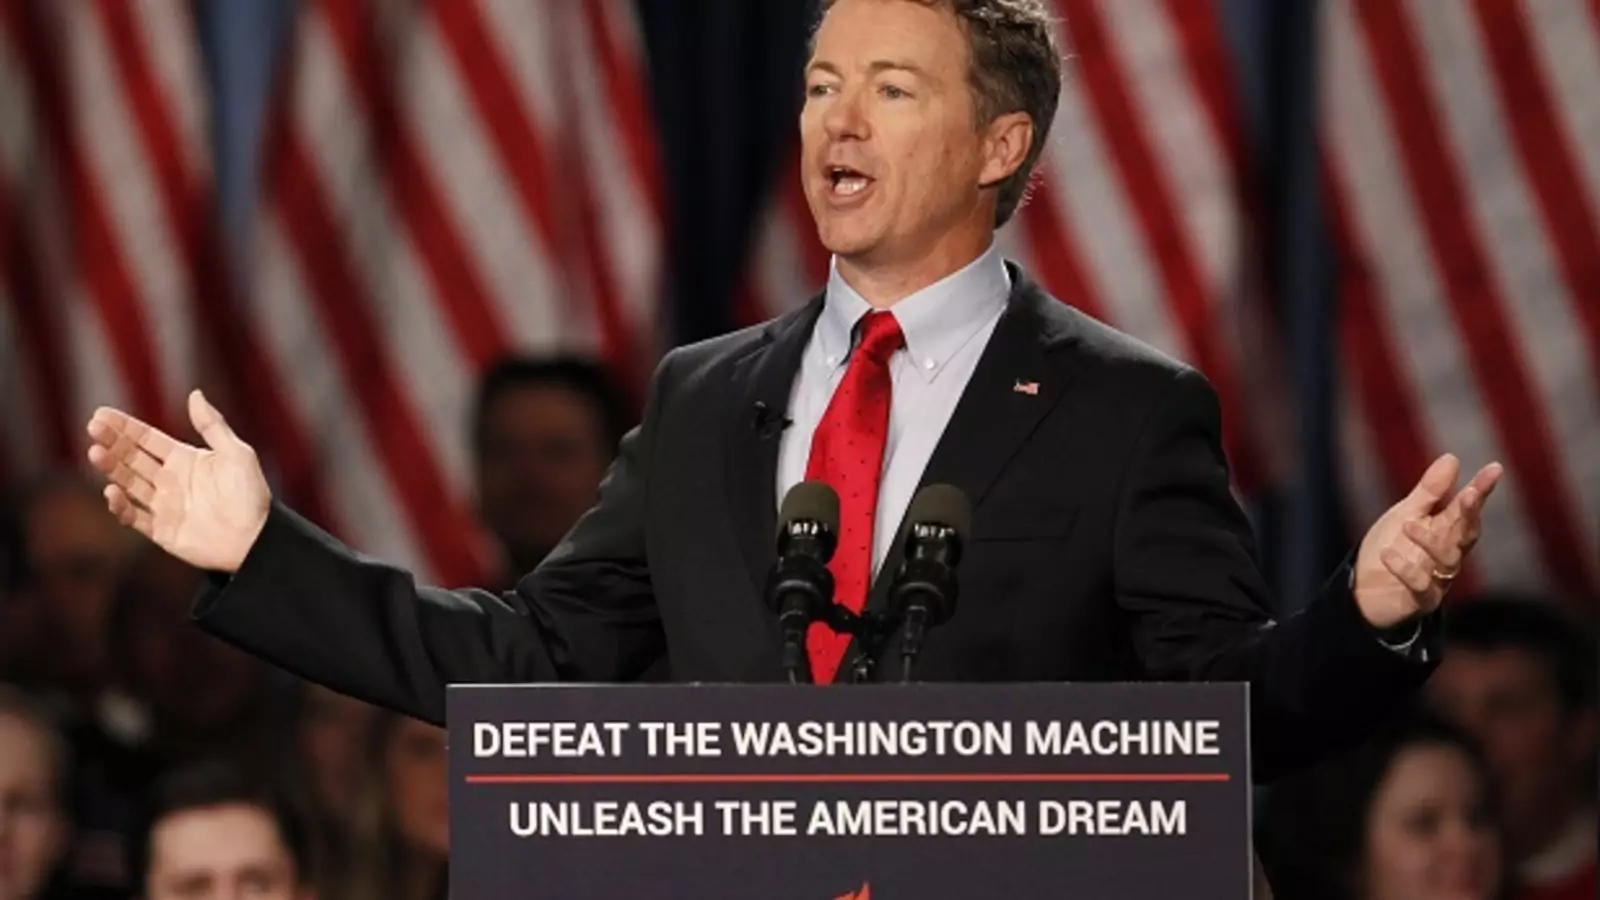 Campaign 2016: Senator Rand Paul, GOP Presidential Candidate | Council on Foreign ...1600 x 900